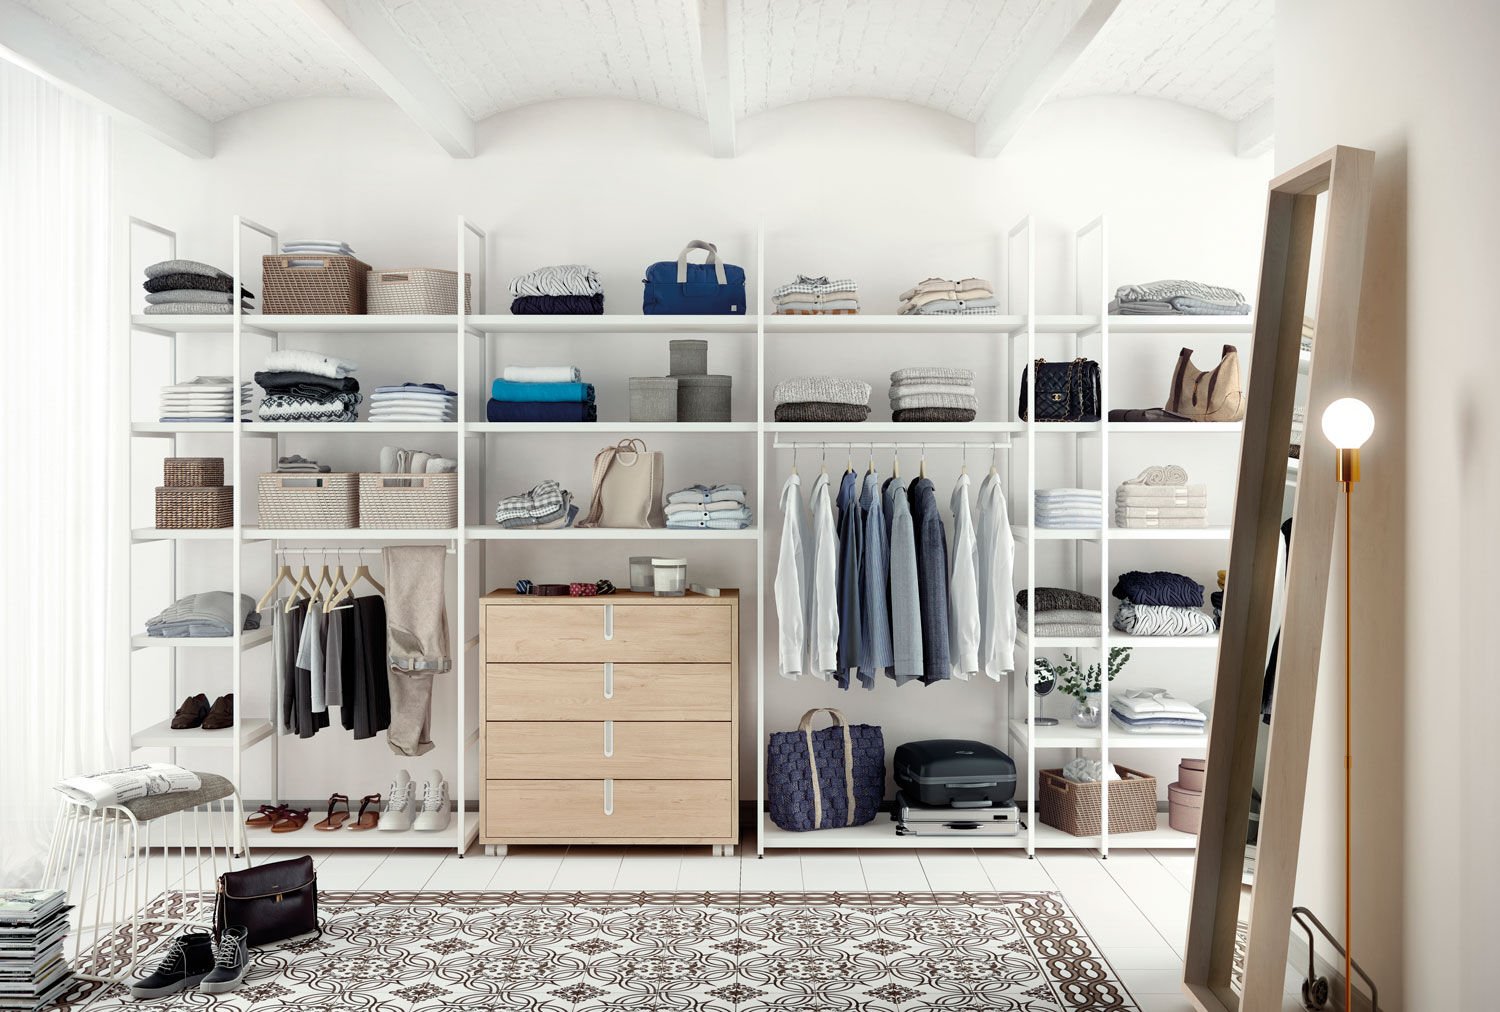 Dressing room: style, ergonomics and accessories in the interior